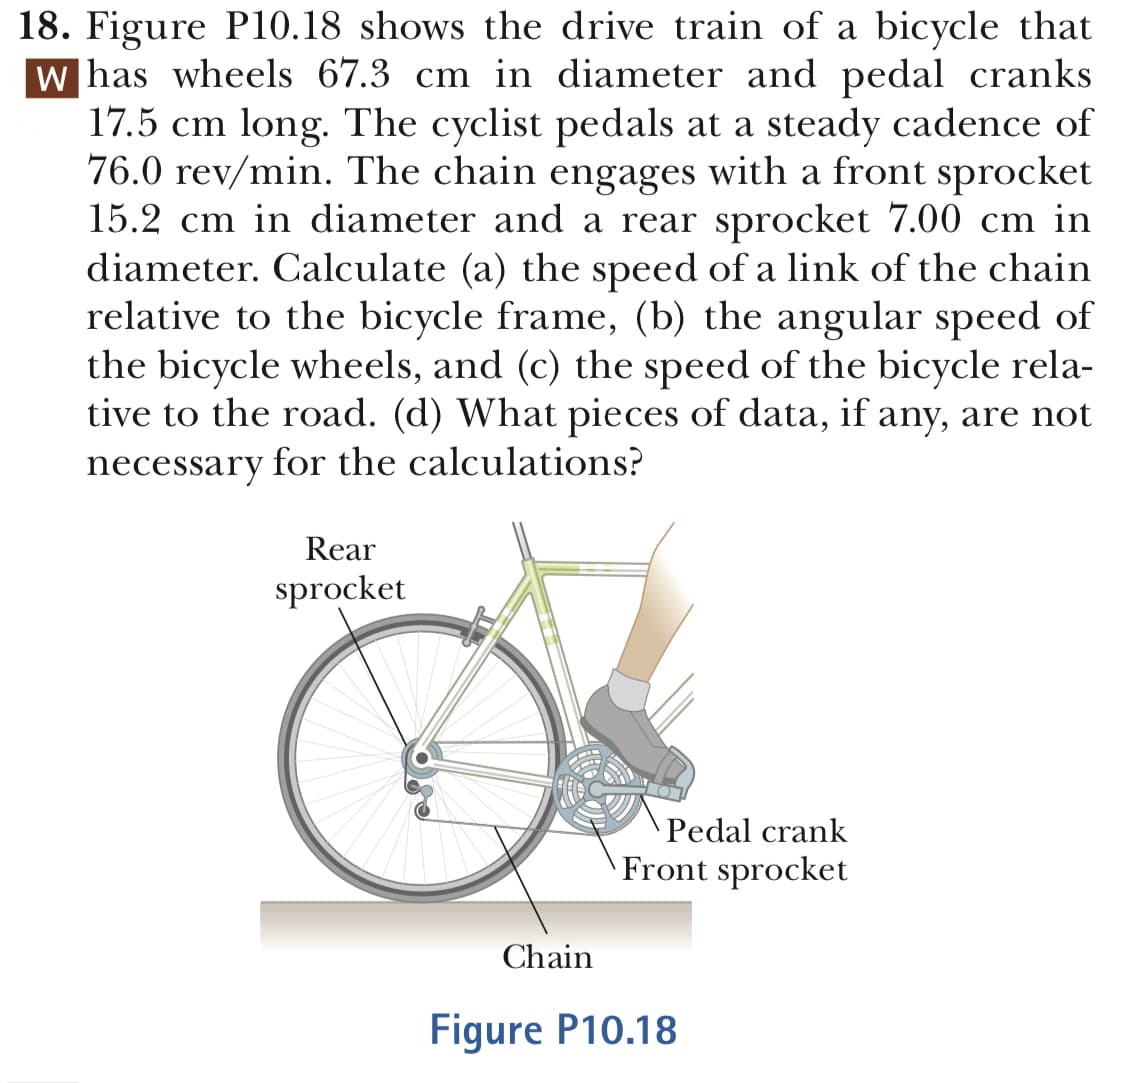 18. Figure P10.18 shows the drive train of a bicvcle that
has wheels 67.3 cm in diameter and pedal cranks
17.5 cm long. The cyclist pedals at a steady cadence of
76.0 rev/min. The chain engages with a front sprocket
15.2 cm in diameter and a rear sprocket 7.00 cm in
diameter. Calculate (a) the speed of a link of the chain
relative to the bicycle frame, (b) the angular speed of
the bicycle wheels, and (c) the speed of the bicycle rela-
tive to the road. (d) What pieces of data, if any, are not
necessary for the calculations?
Rear
sprocket
Pedal crank
Front sprocket
Chain
Fiqure P10.18
